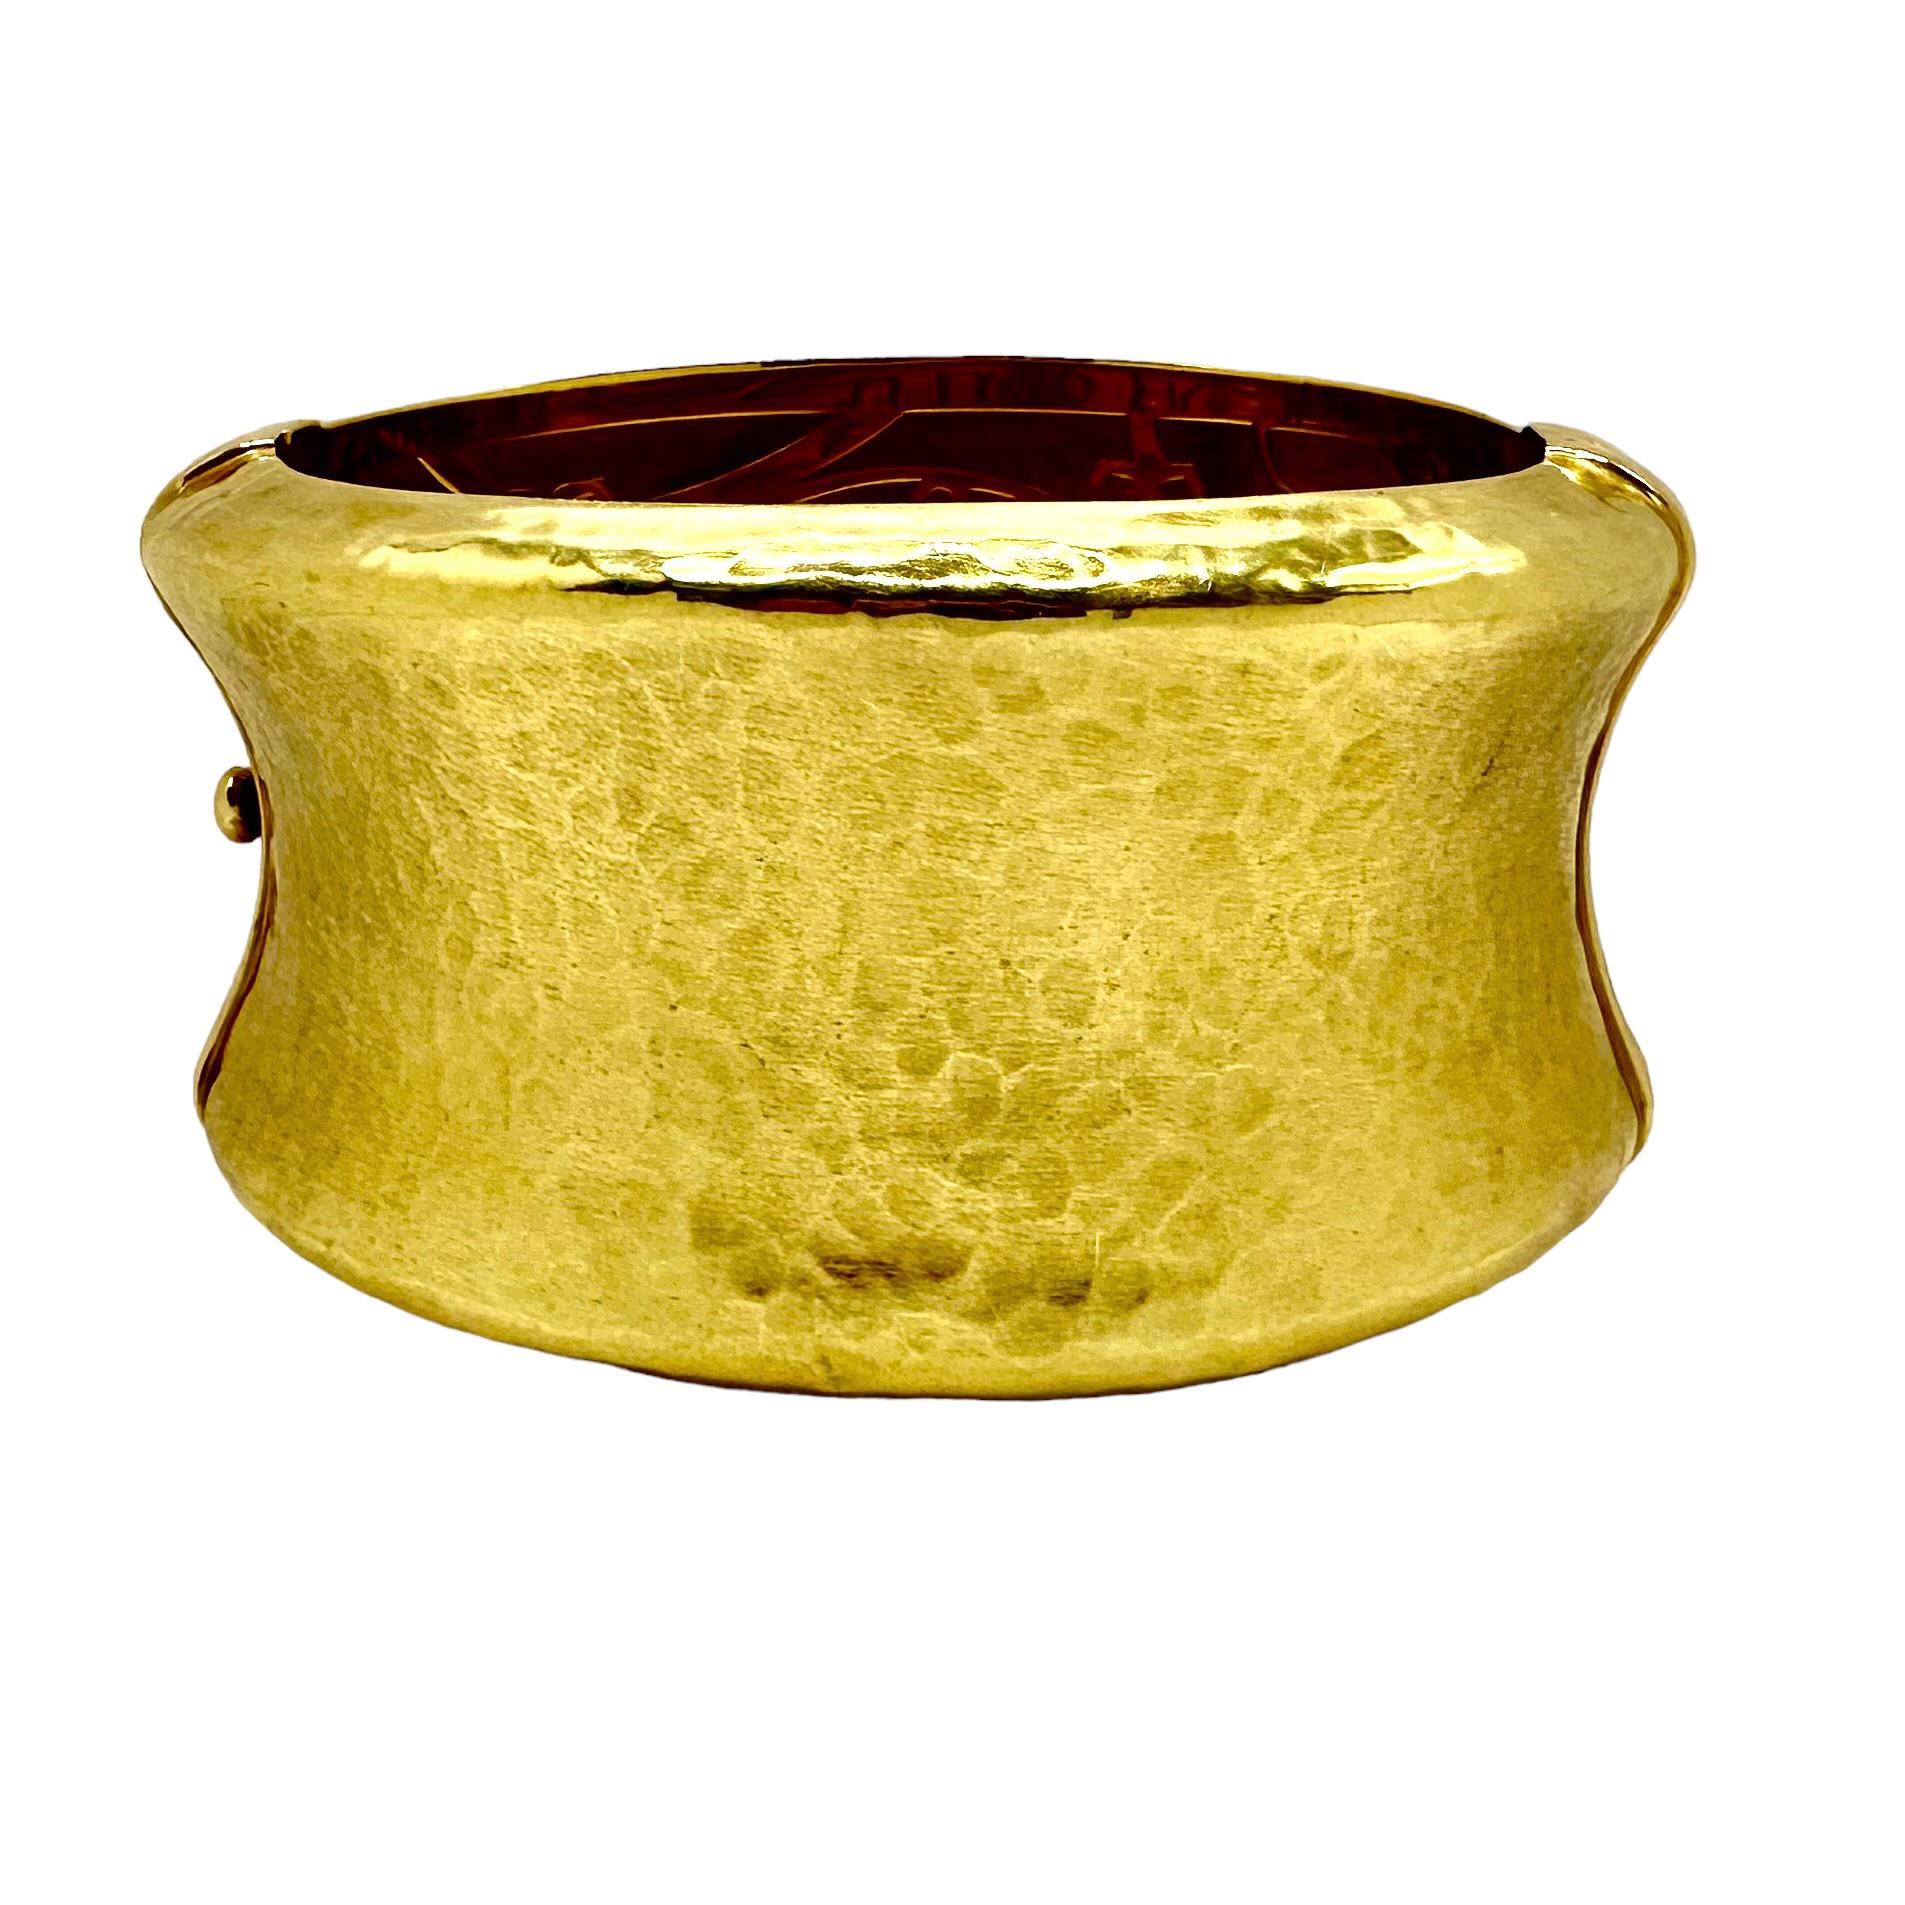 This wonderful vintage 18k yellow gold concave cuff bracelet measures a full 1 5/8 inches in width. With distinctive beveled edges and a dramatic hammered finish on the satin gold surfaces, plus the contrasting high polished seams, this unique